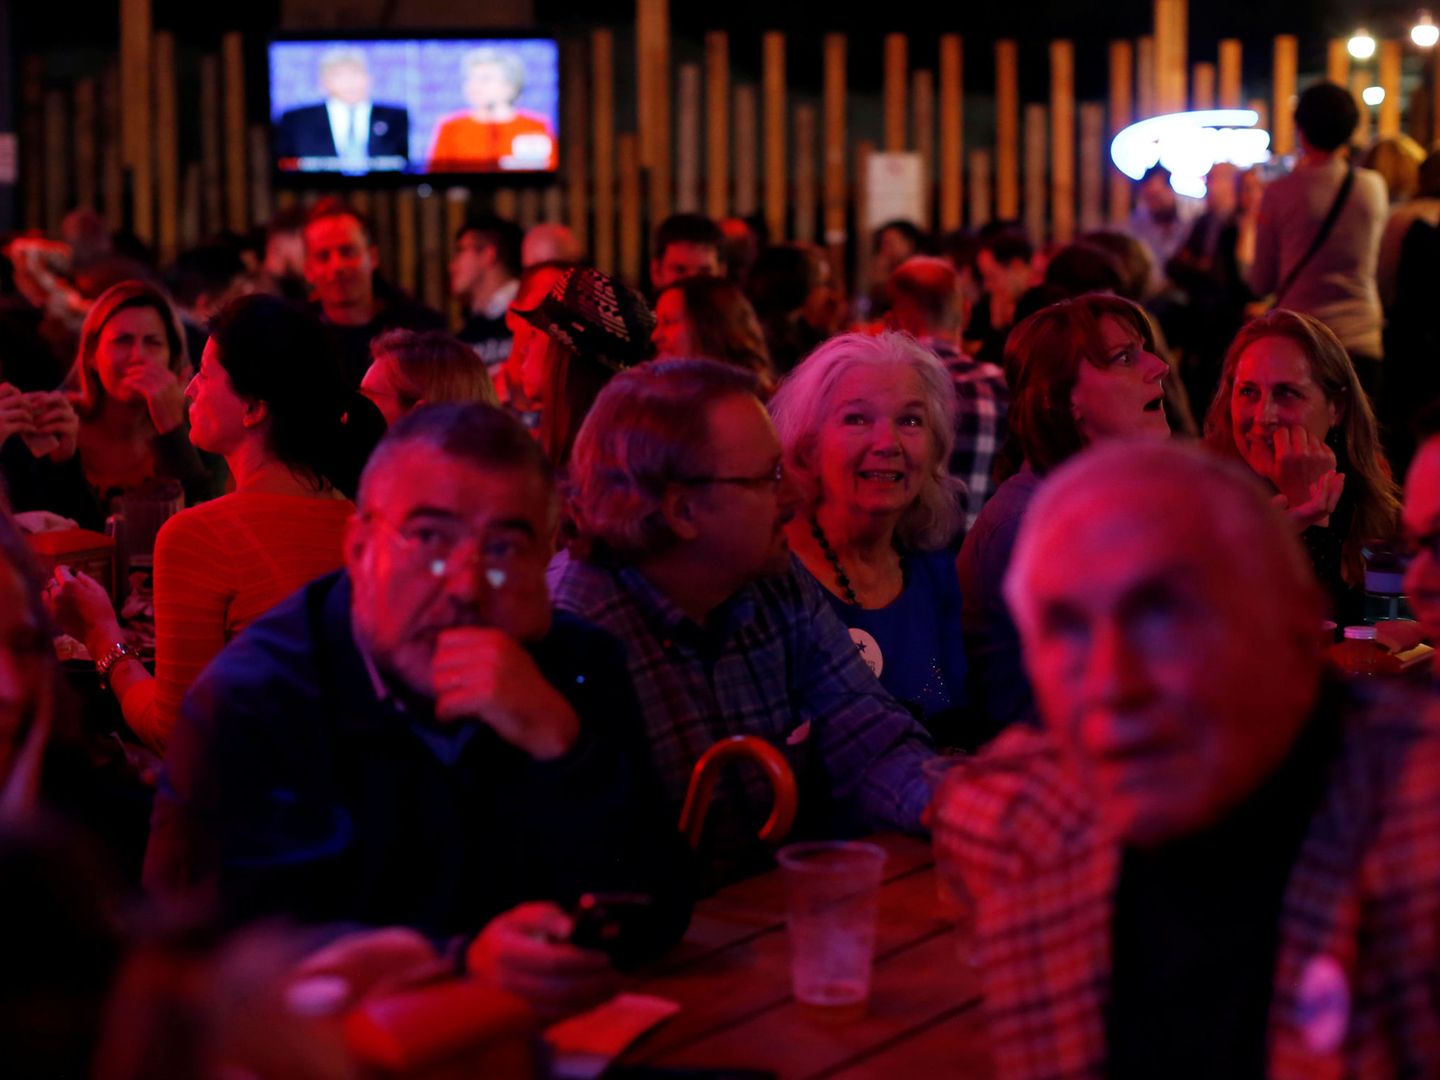 People, including U.S. Democrats living in Mexico, watch a television broadcast of the first presidential debate between U.S. Democratic presidential candidate Hillary Clinton and U.S. Republican presidential nominee Donald Trump, in a restaurant in Mexico City, Mexico September 26, 2016.  REUTERS Carlos Jasso